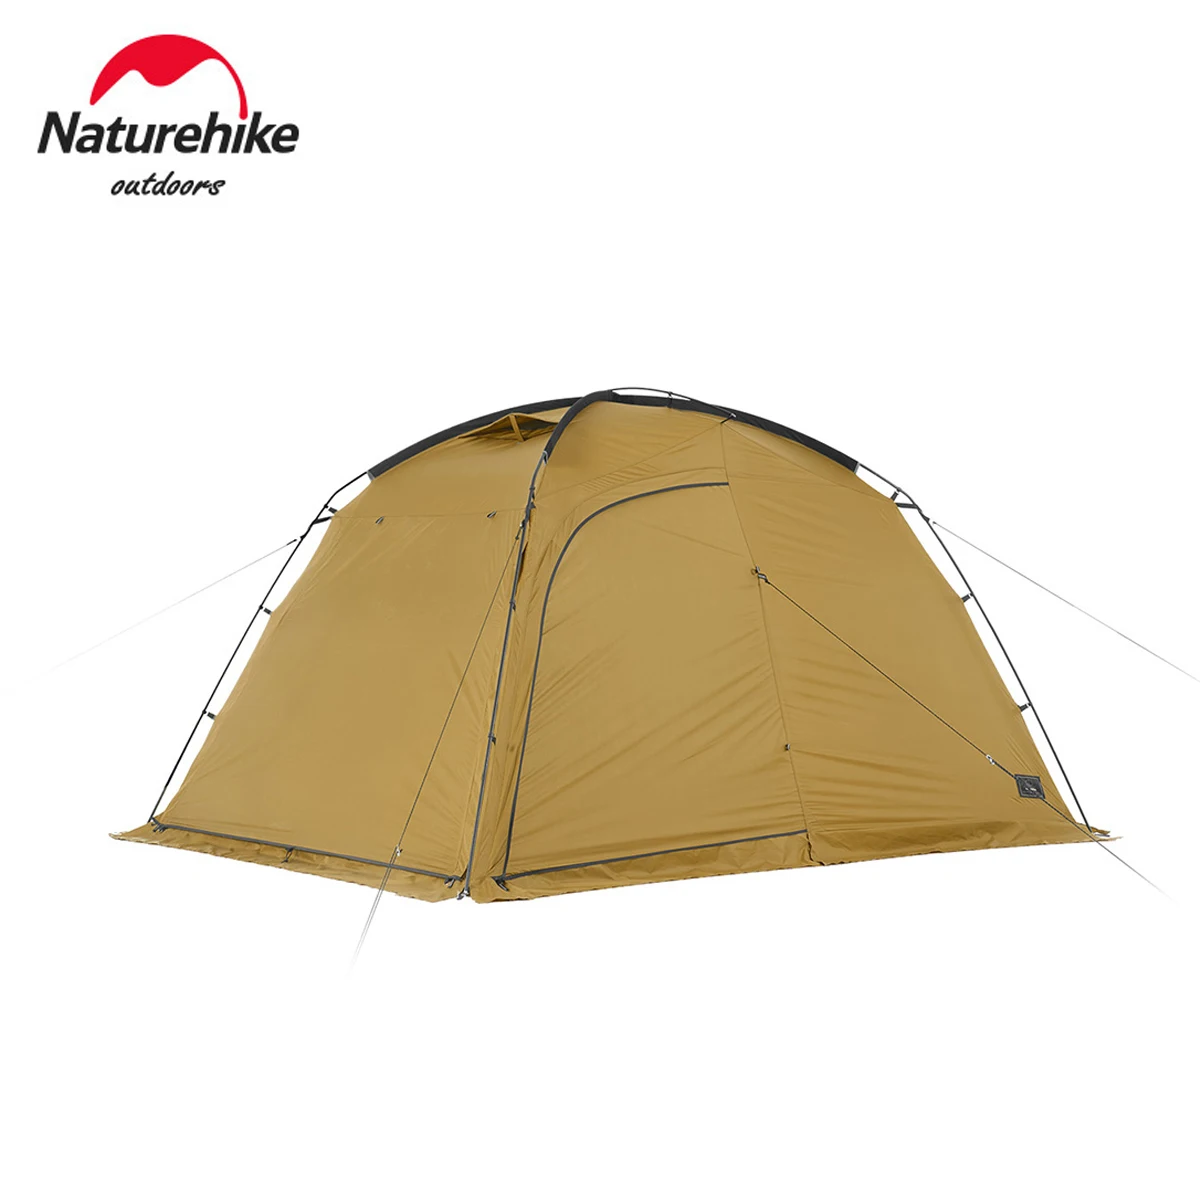 

Naturehike 50D Nylon Camping Tent Canopy Outdoor Hiking Tent Two Person Lightweight Camping awning One Room And One Hall Tents